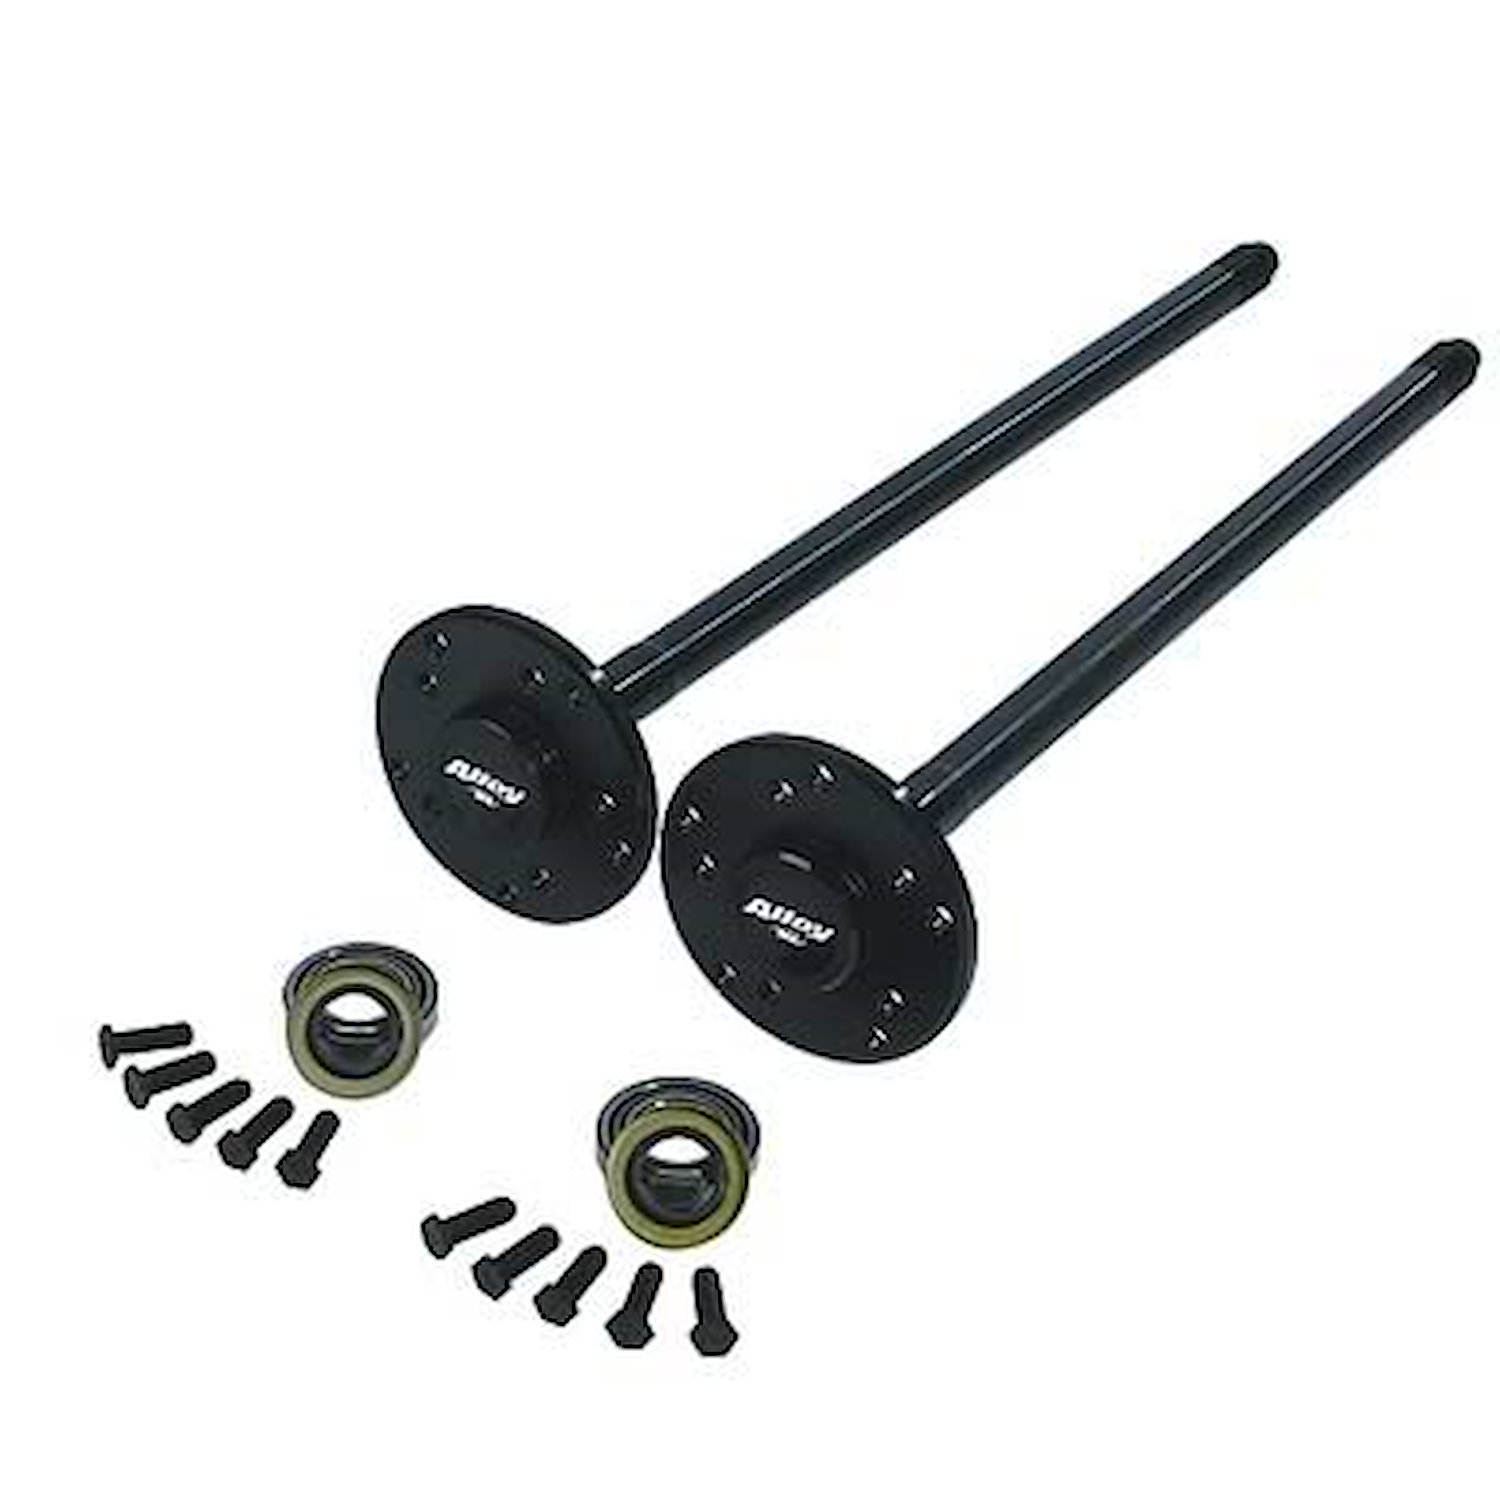 Ford 8.8" Performance Rear Axle Kit 1999-04 Mustang